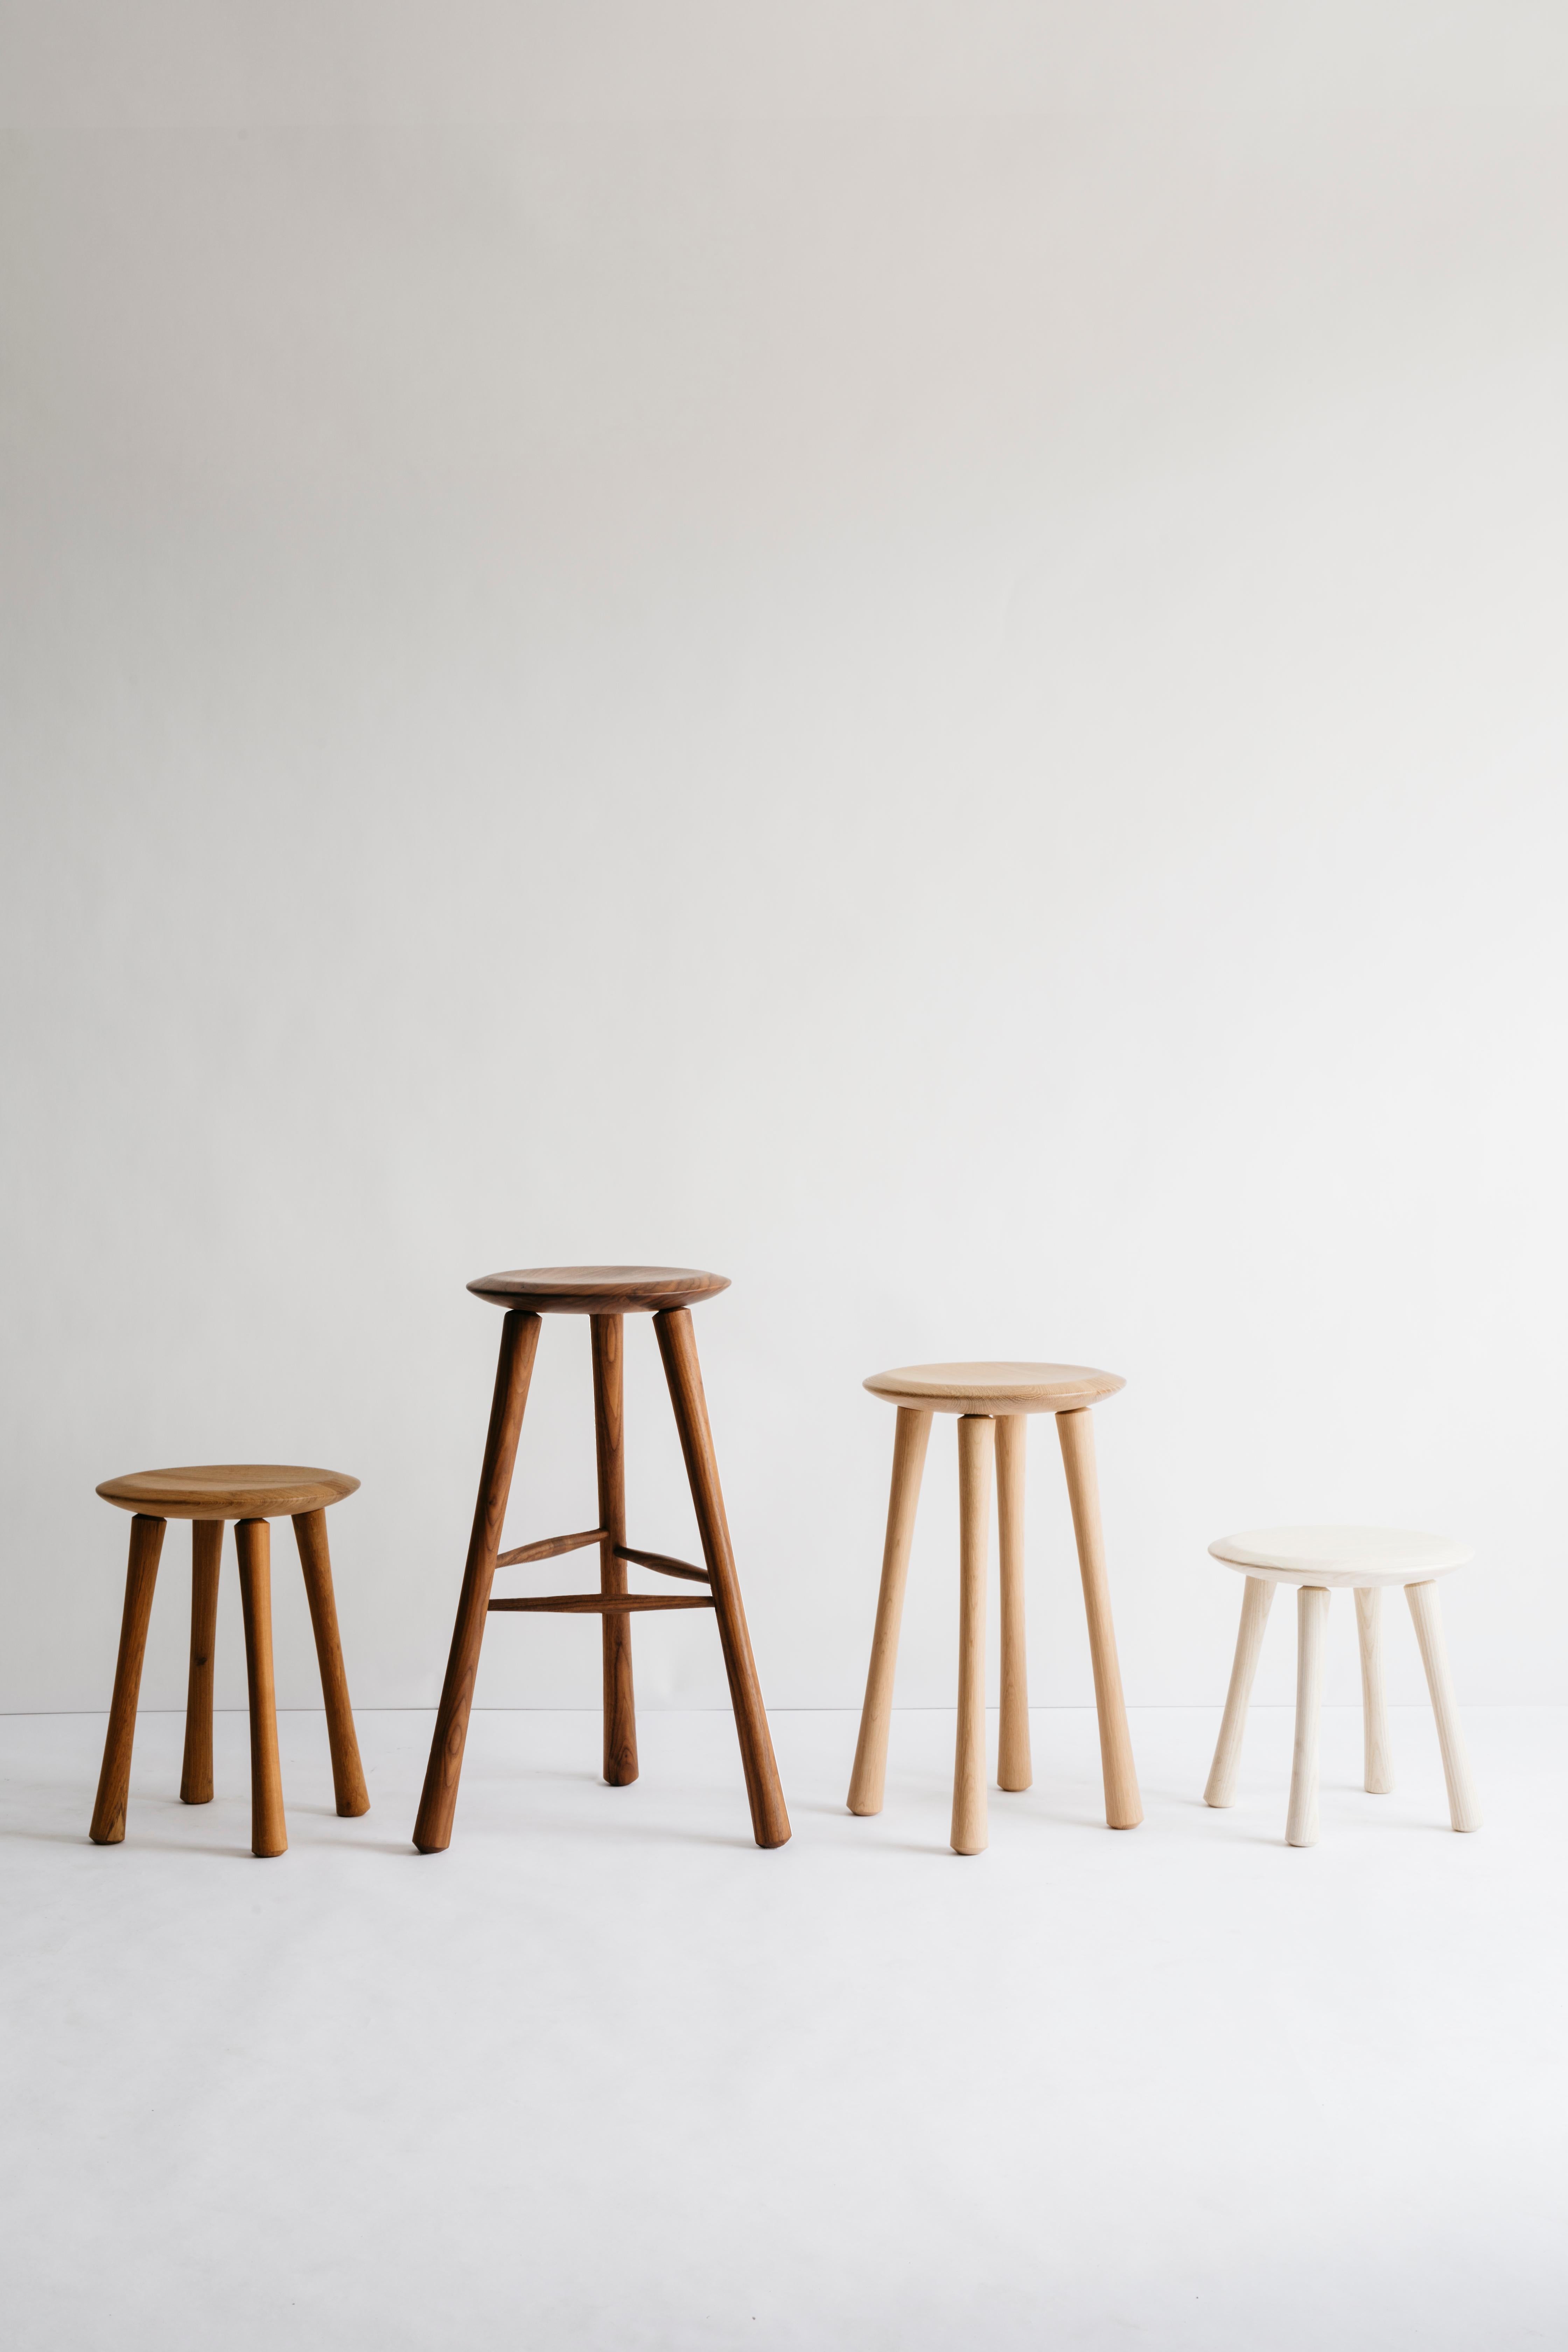 The Richard Watson fawn stools are inspired by the form of an antique milk stool. The stools come in 4 sizes - step, table, counter, and bar. 

Each Richard Watson piece is made in Pawtucket, RI by a team of men and women who are passionate about